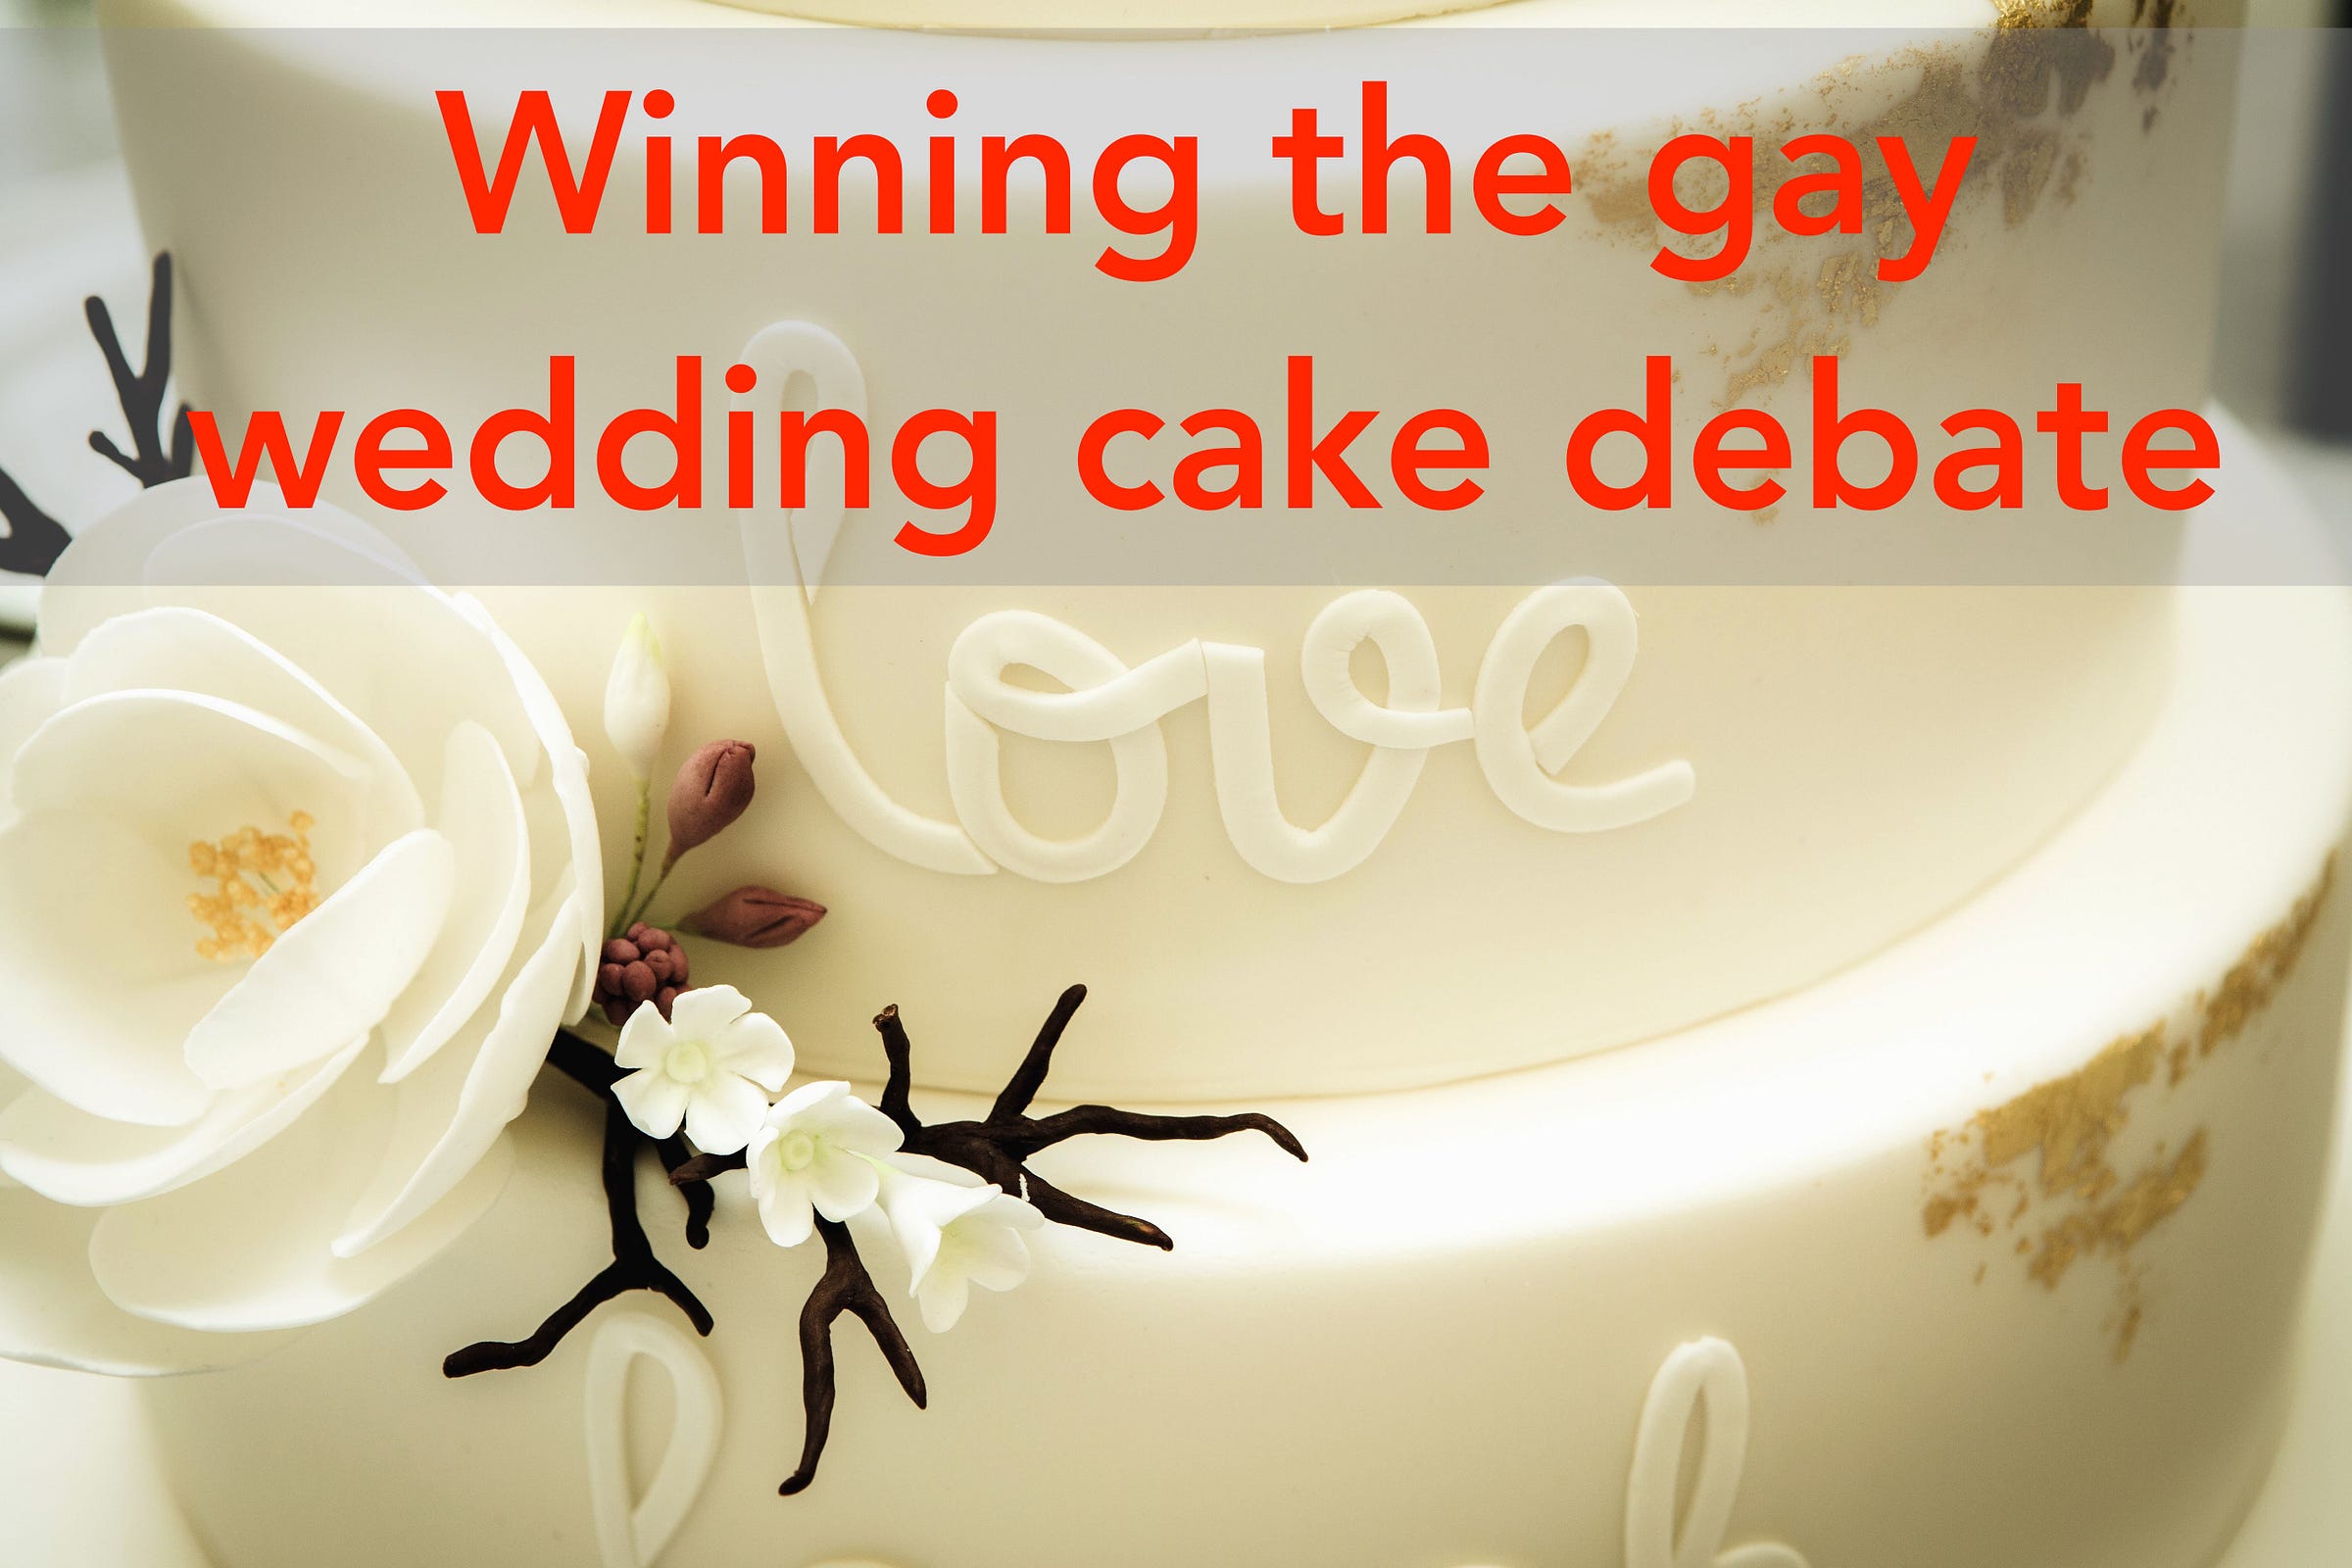 All You Need To Know To Win An Argument About The Gay Wedding Cake Case